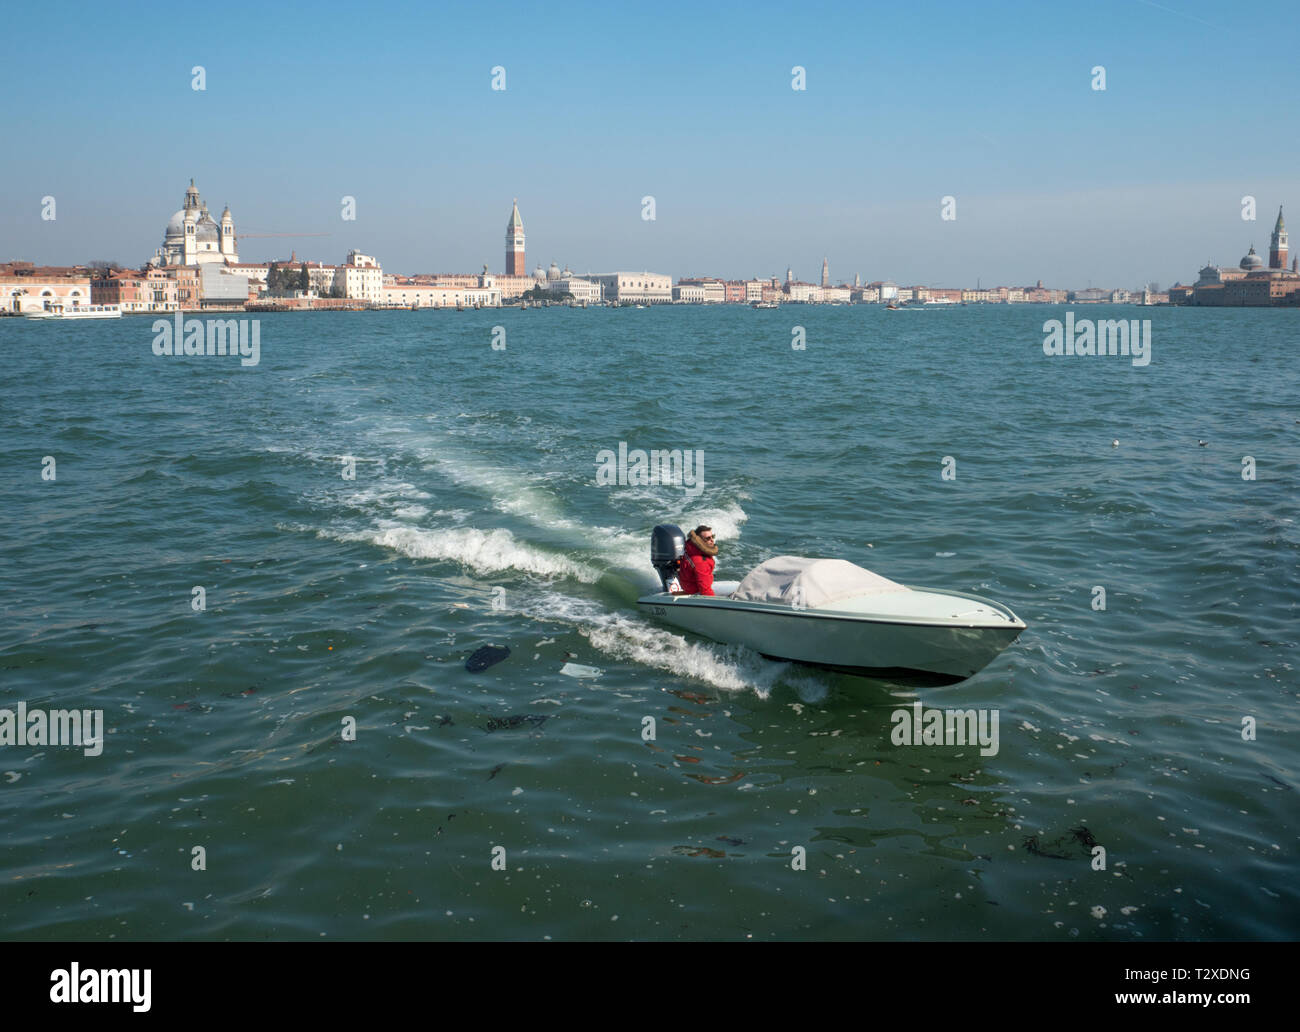 Commuting in style. Personal transport in and around Venice, Italy. Stock Photo